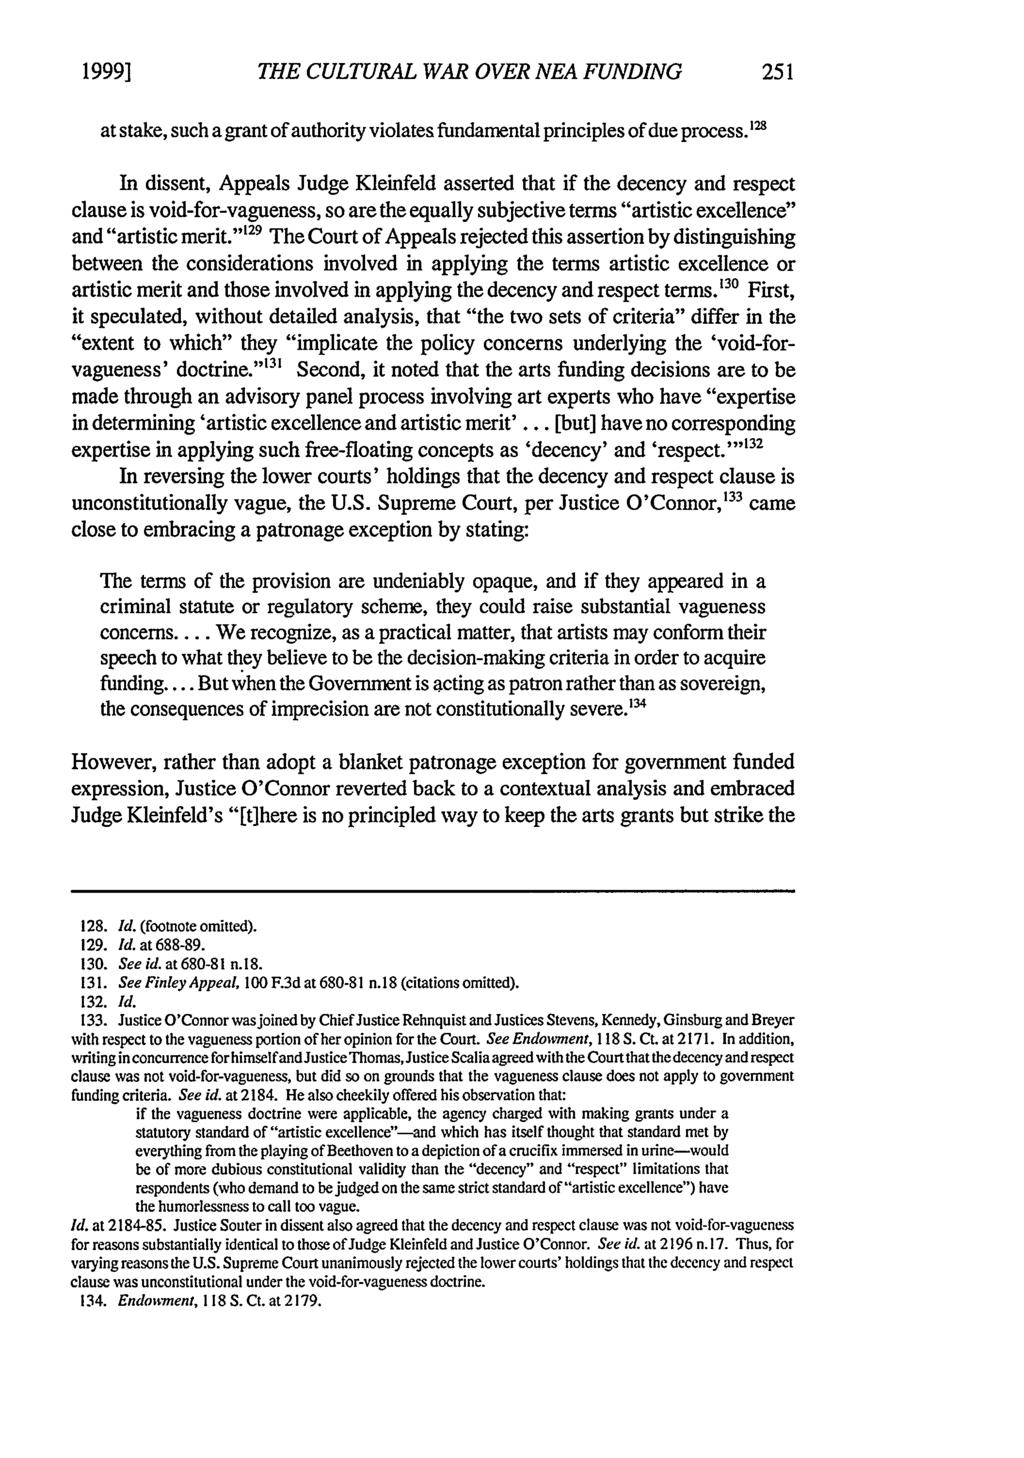 1999] Allison: The Cultural War over NEA Funding: Illogical Statutory Deconstruc THE CULTURAL WAR OVER NEA FUNDING at stake, such a grant of authority violates fundamental principles of due process.